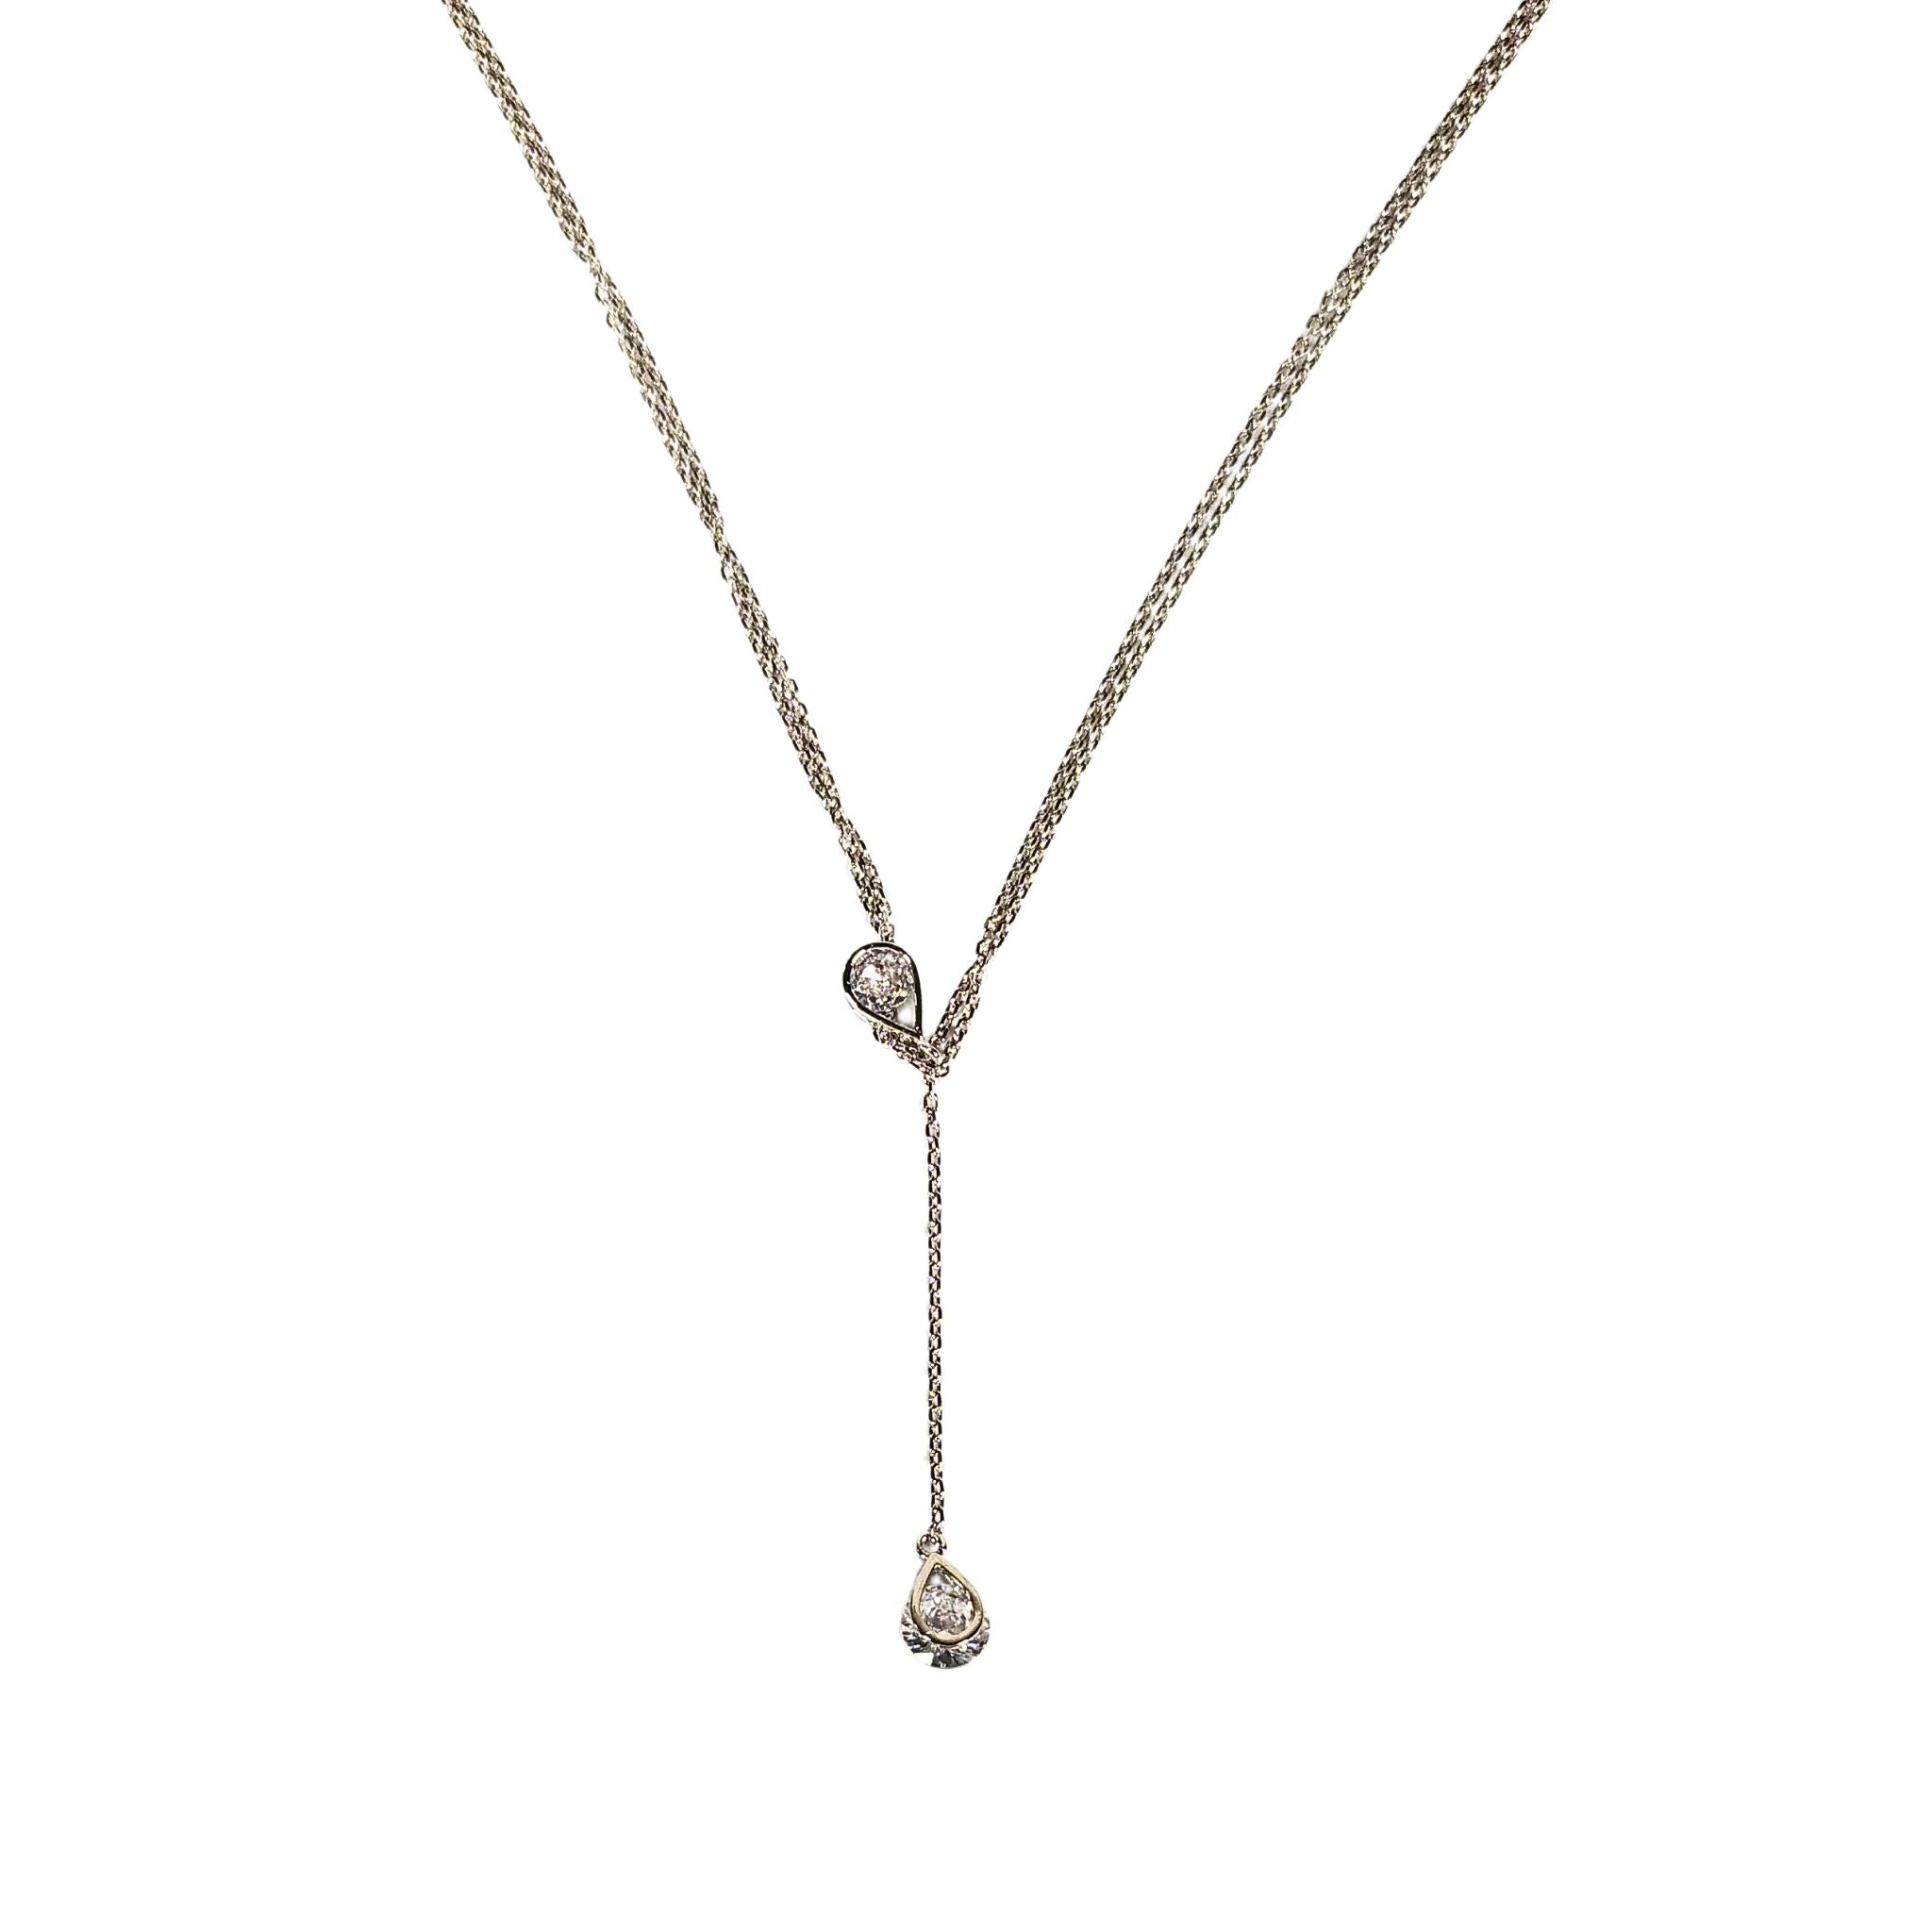 Pearls of Korea | The Simple Stone Pendant | Sterling Silver 92.5